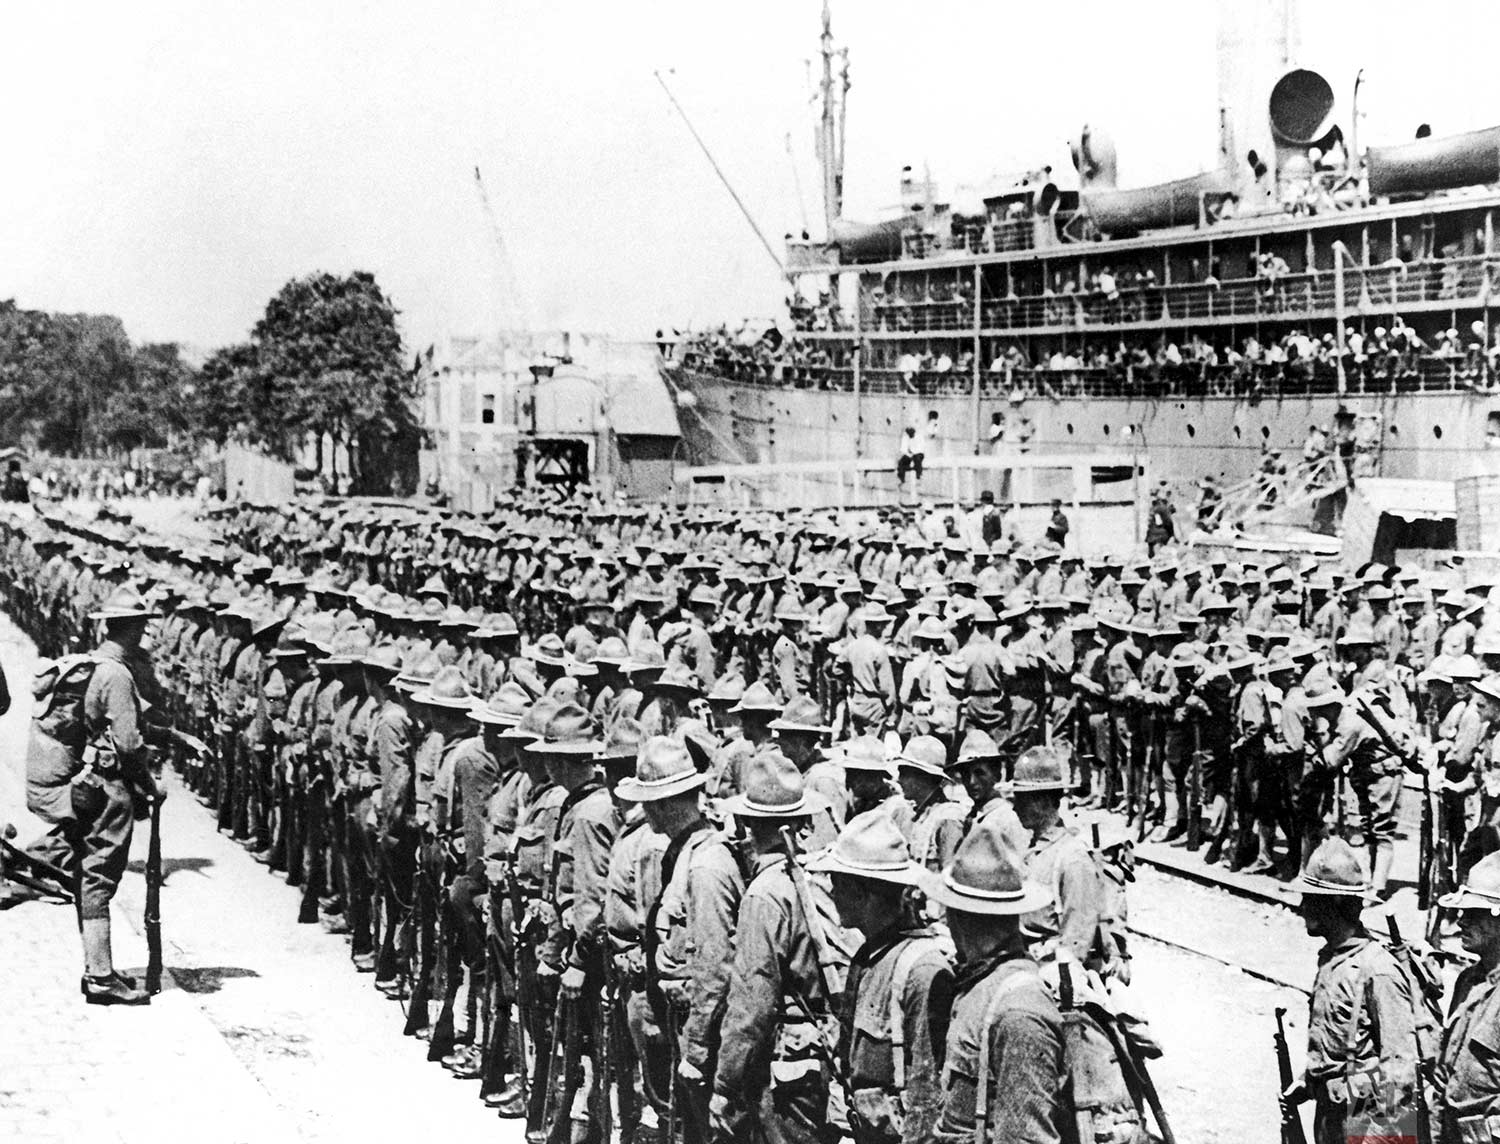  In this June 1917 photo, the first troops of the American Expeditionary Force land at the French port of St. Nazaire, France. (AP Photo) 